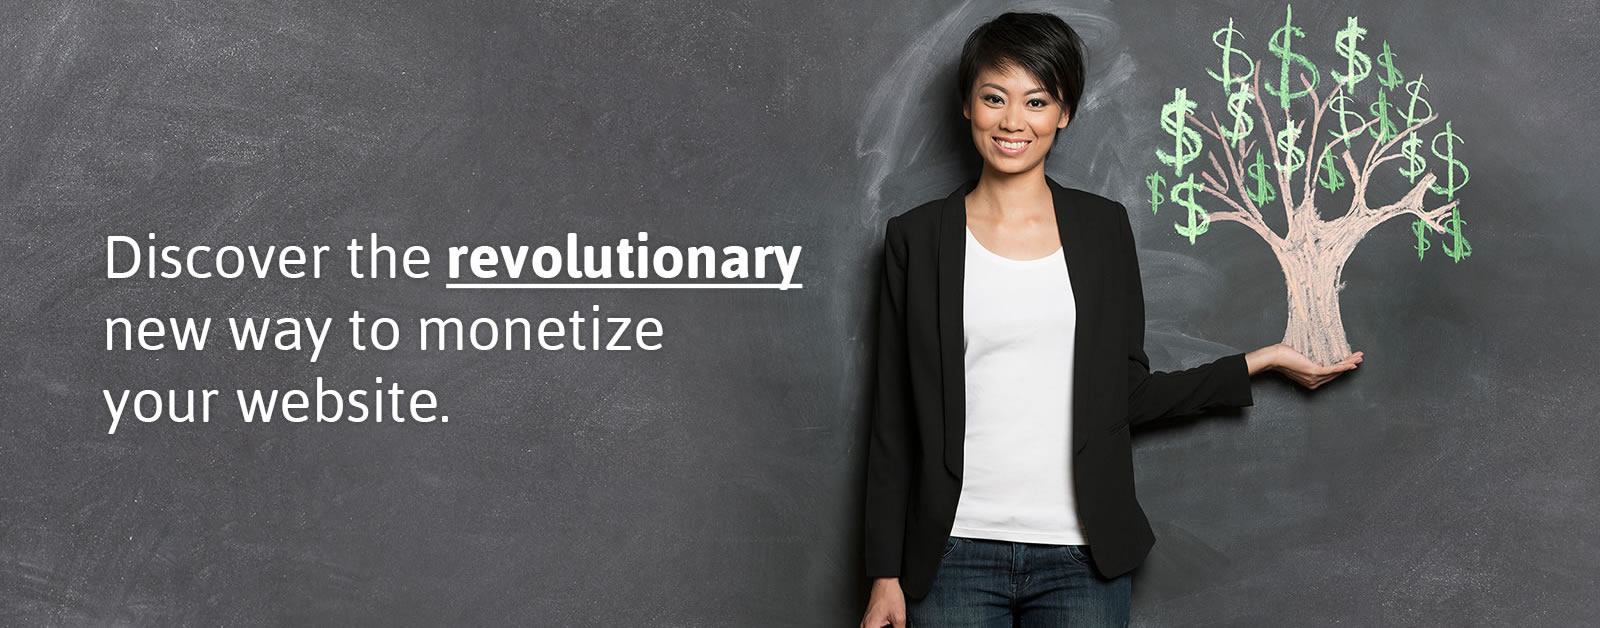 Discover the revolutionary new way to monetize your website.